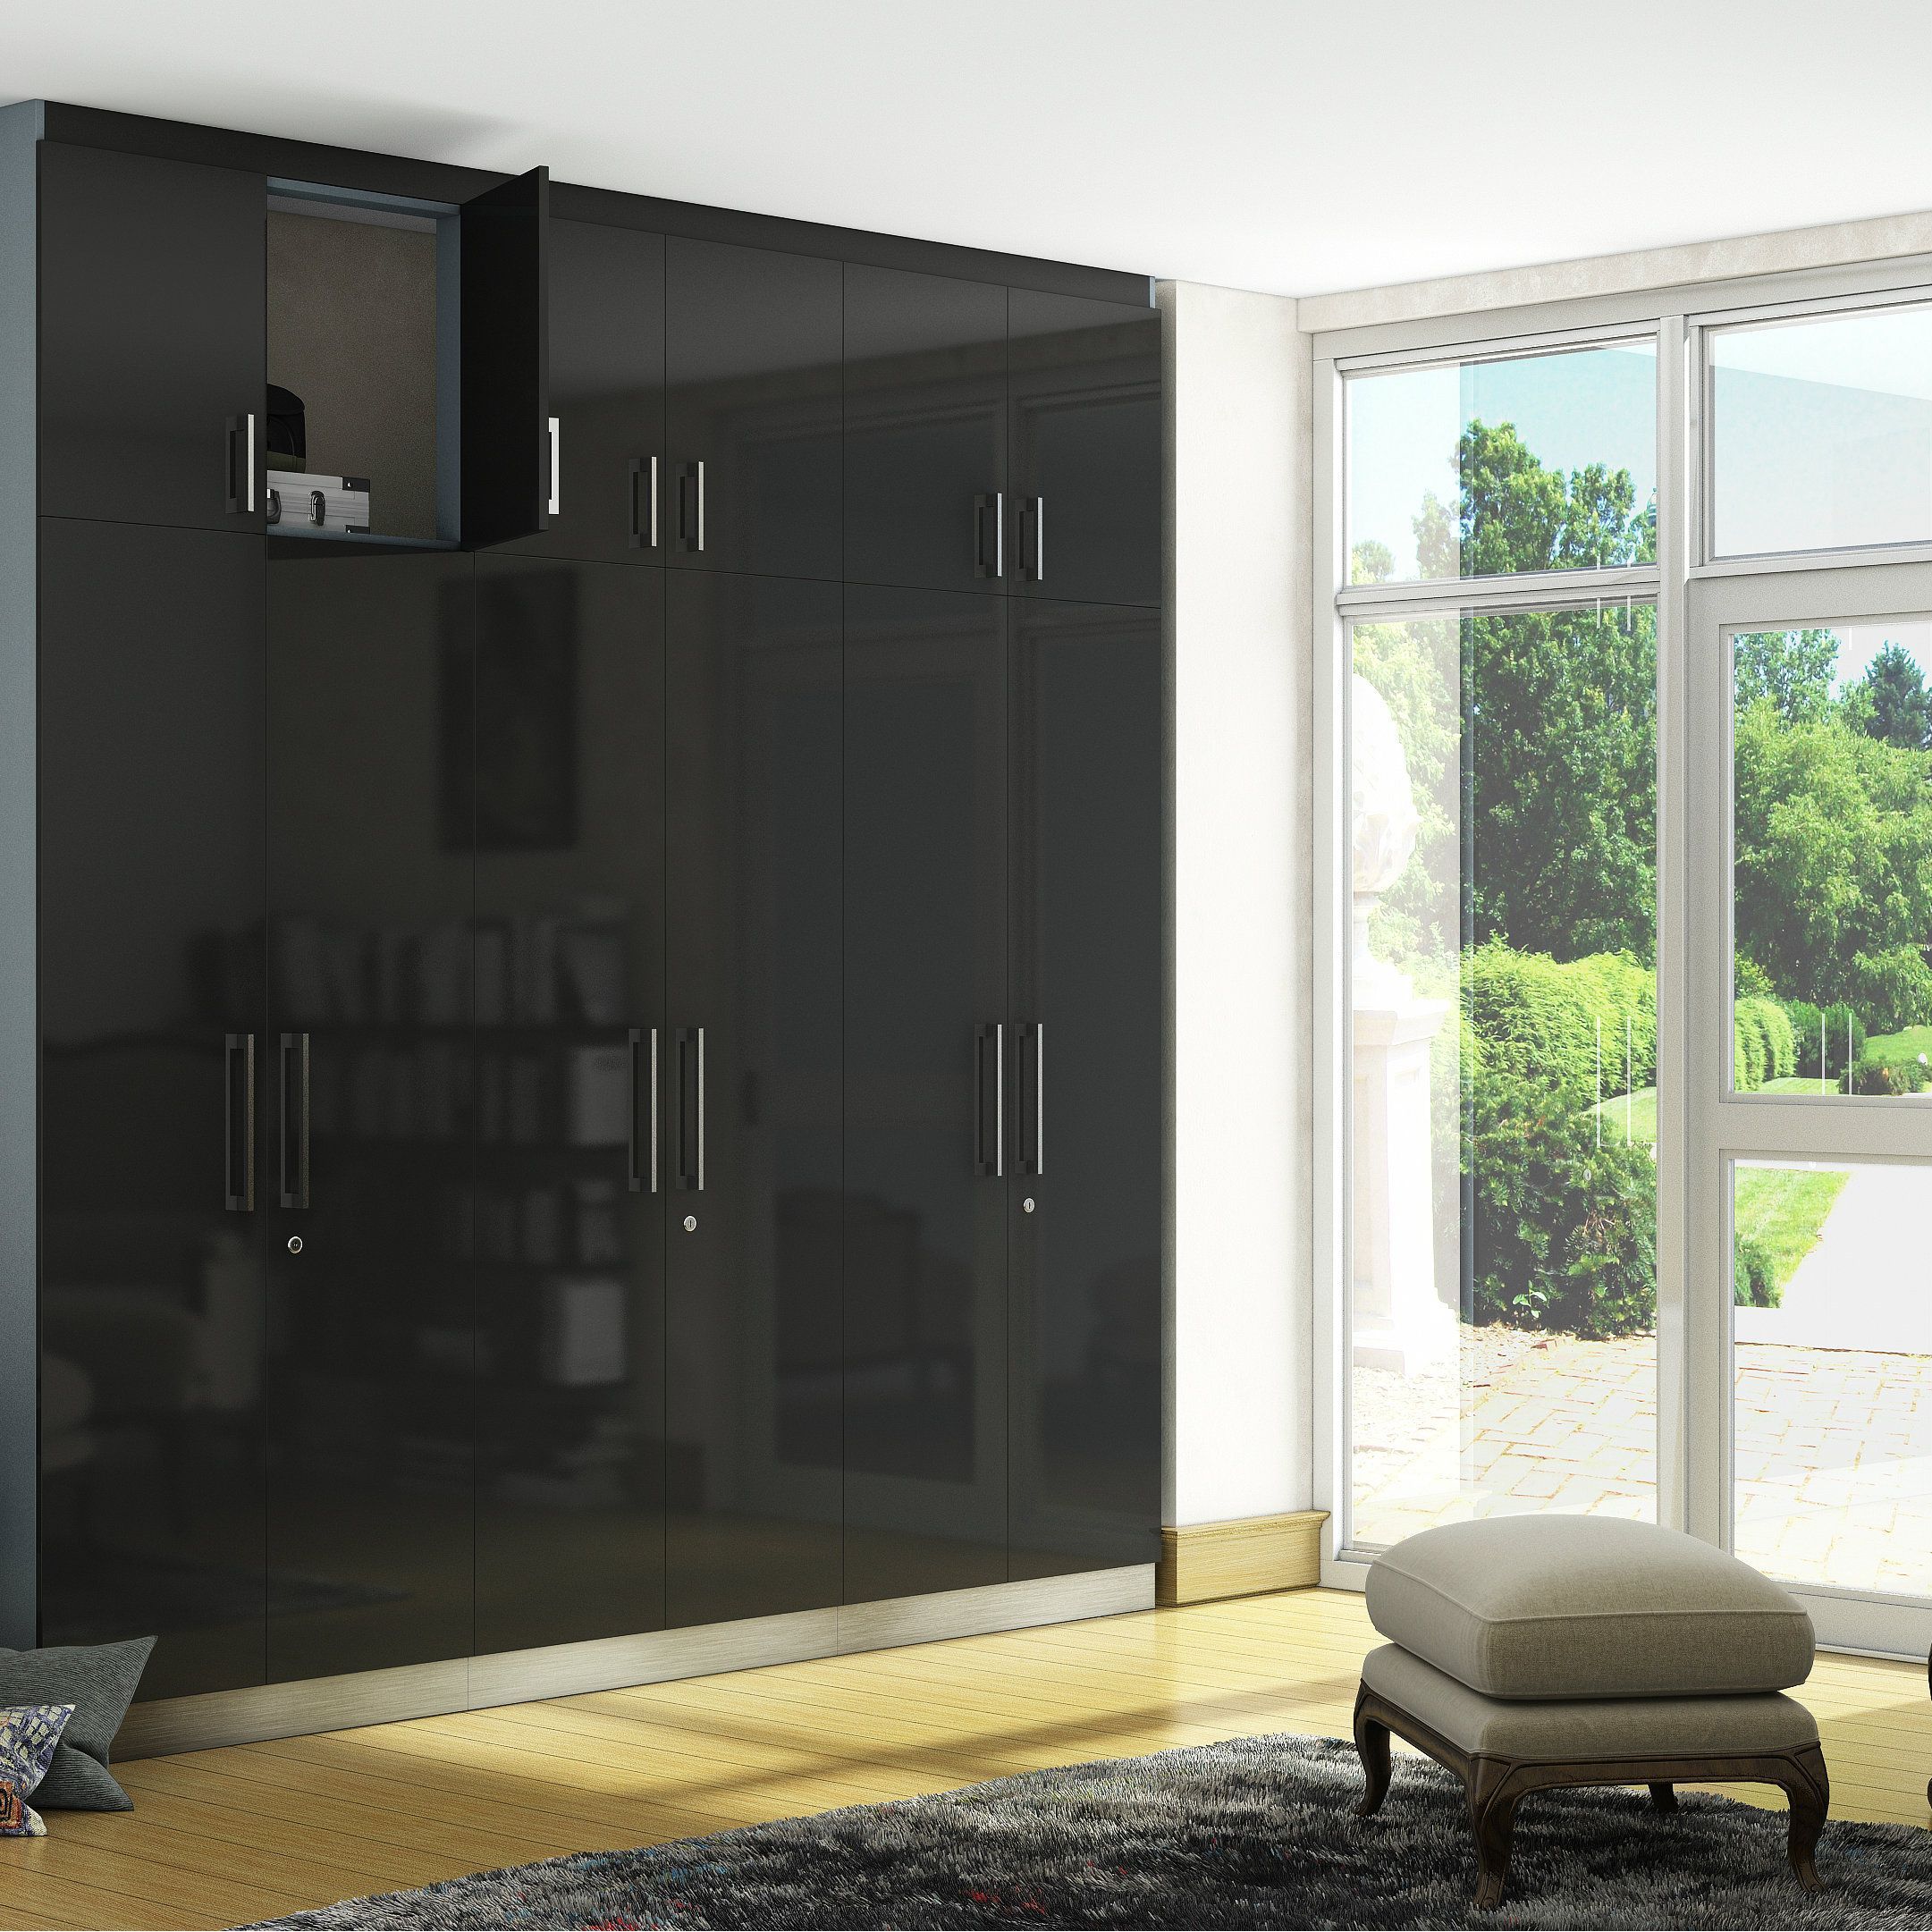 A Glossy Black Wardrobe That Is Every Bit As Impressive And Functional |  Wardrobe Design, Furniture Design, Grey Wardrobe Intended For High Gloss Black Wardrobes (Photo 7 of 15)